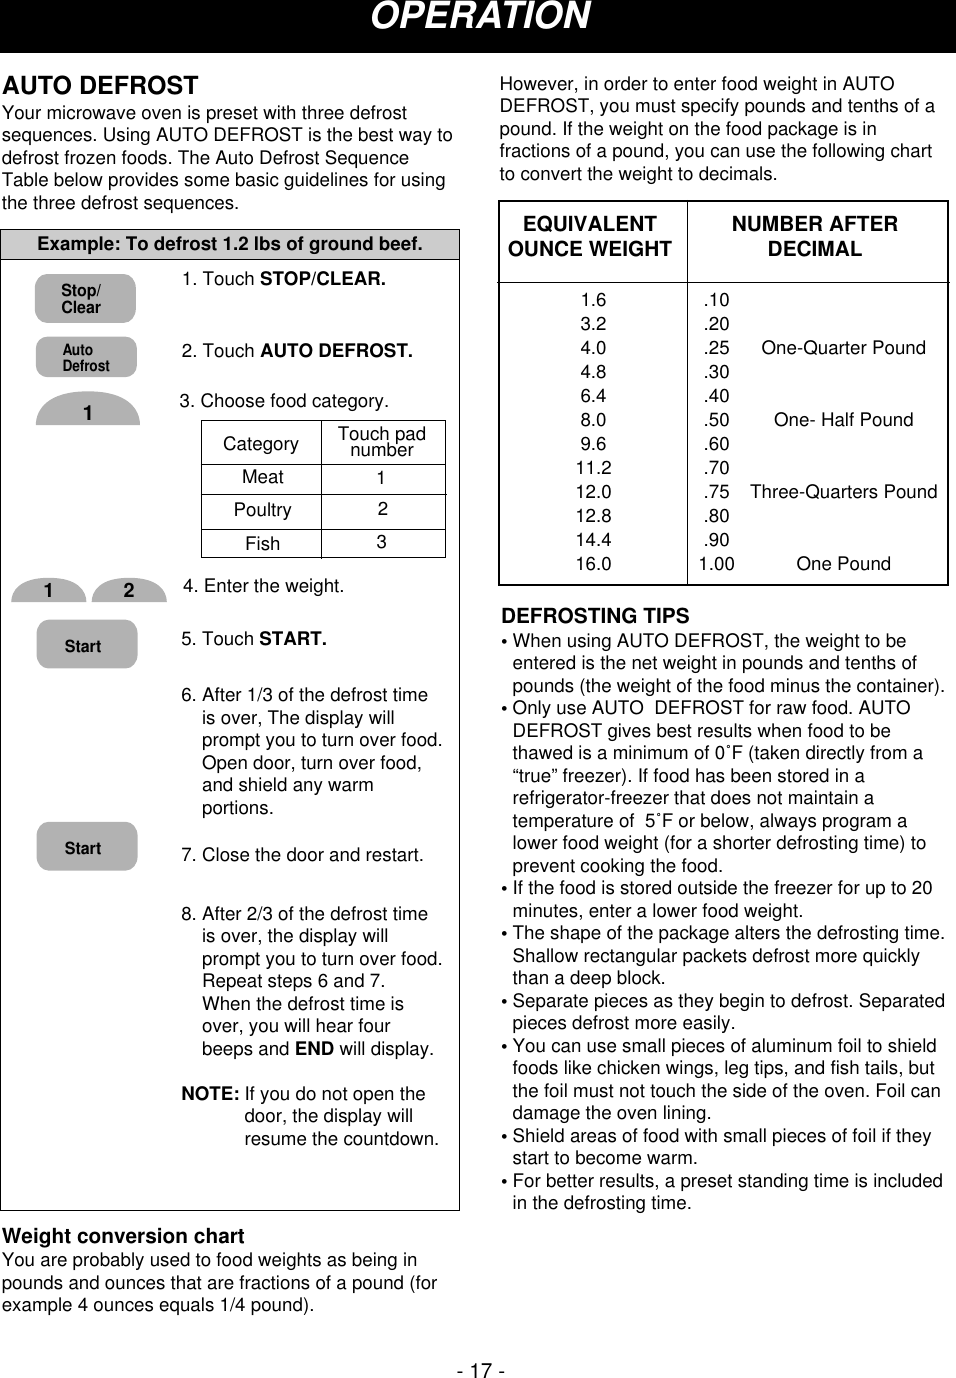 - 17 -OPERATIONWeight conversion chartYou are probably used to food weights as being inpounds and ounces that are fractions of a pound (forexample 4 ounces equals 1/4 pound).However, in order to enter food weight in AUTODEFROST, you must specify pounds and tenths of apound. If the weight on the food package is infractions of a pound, you can use the following chartto convert the weight to decimals.DEFROSTING TIPS• When using AUTO DEFROST, the weight to beentered is the net weight in pounds and tenths ofpounds (the weight of the food minus the container).• Only use AUTO DEFROST for raw food. AUTODEFROST gives best results when food to bethawed is a minimum of 0˚F (taken directly from a“true” freezer). If food has been stored in arefrigerator-freezer that does not maintain atemperature of  5˚F or below, always program alower food weight (for a shorter defrosting time) toprevent cooking the food. • If the food is stored outside the freezer for up to 20minutes, enter a lower food weight.• The shape of the package alters the defrosting time.Shallow rectangular packets defrost more quicklythan a deep block.• Separate pieces as they begin to defrost. Separatedpieces defrost more easily.• You can use small pieces of aluminum foil to shieldfoods like chicken wings, leg tips, and fish tails, butthe foil must not touch the side of the oven. Foil candamage the oven lining.• Shield areas of food with small pieces of foil if theystart to become warm.• For better results, a preset standing time is includedin the defrosting time.NUMBER AFTERDECIMALEQUIVALENTOUNCE WEIGHT.10.20.25.30.40.50.60.70.75.80.901.001.63.24.04.86.48.09.611.212.012.814.416.0One-Quarter PoundOne- Half PoundThree-Quarters PoundOne PoundAUTO DEFROSTYour microwave oven is preset with three defrostsequences. Using AUTO DEFROST is the best way todefrost frozen foods. The Auto Defrost SequenceTable below provides some basic guidelines for usingthe three defrost sequences. 1. Touch STOP/CLEAR.2. Touch AUTO DEFROST.Example: To defrost 1.2 lbs of ground beef.Stop/ClearAutoDefrost11 2StartStartCategoryMeatPoultryFishTouch padnumber1234. Enter the weight.3. Choose food category.5. Touch START.6. After 1/3 of the defrost timeis over, The display willprompt you to turn over food.Open door, turn over food,and shield any warmportions.7. Close the door and restart.8. After 2/3 of the defrost timeis over, the display willprompt you to turn over food.Repeat steps 6 and 7.When the defrost time isover, you will hear fourbeeps and END will display.NOTE: If you do not open thedoor, the display willresume the countdown.